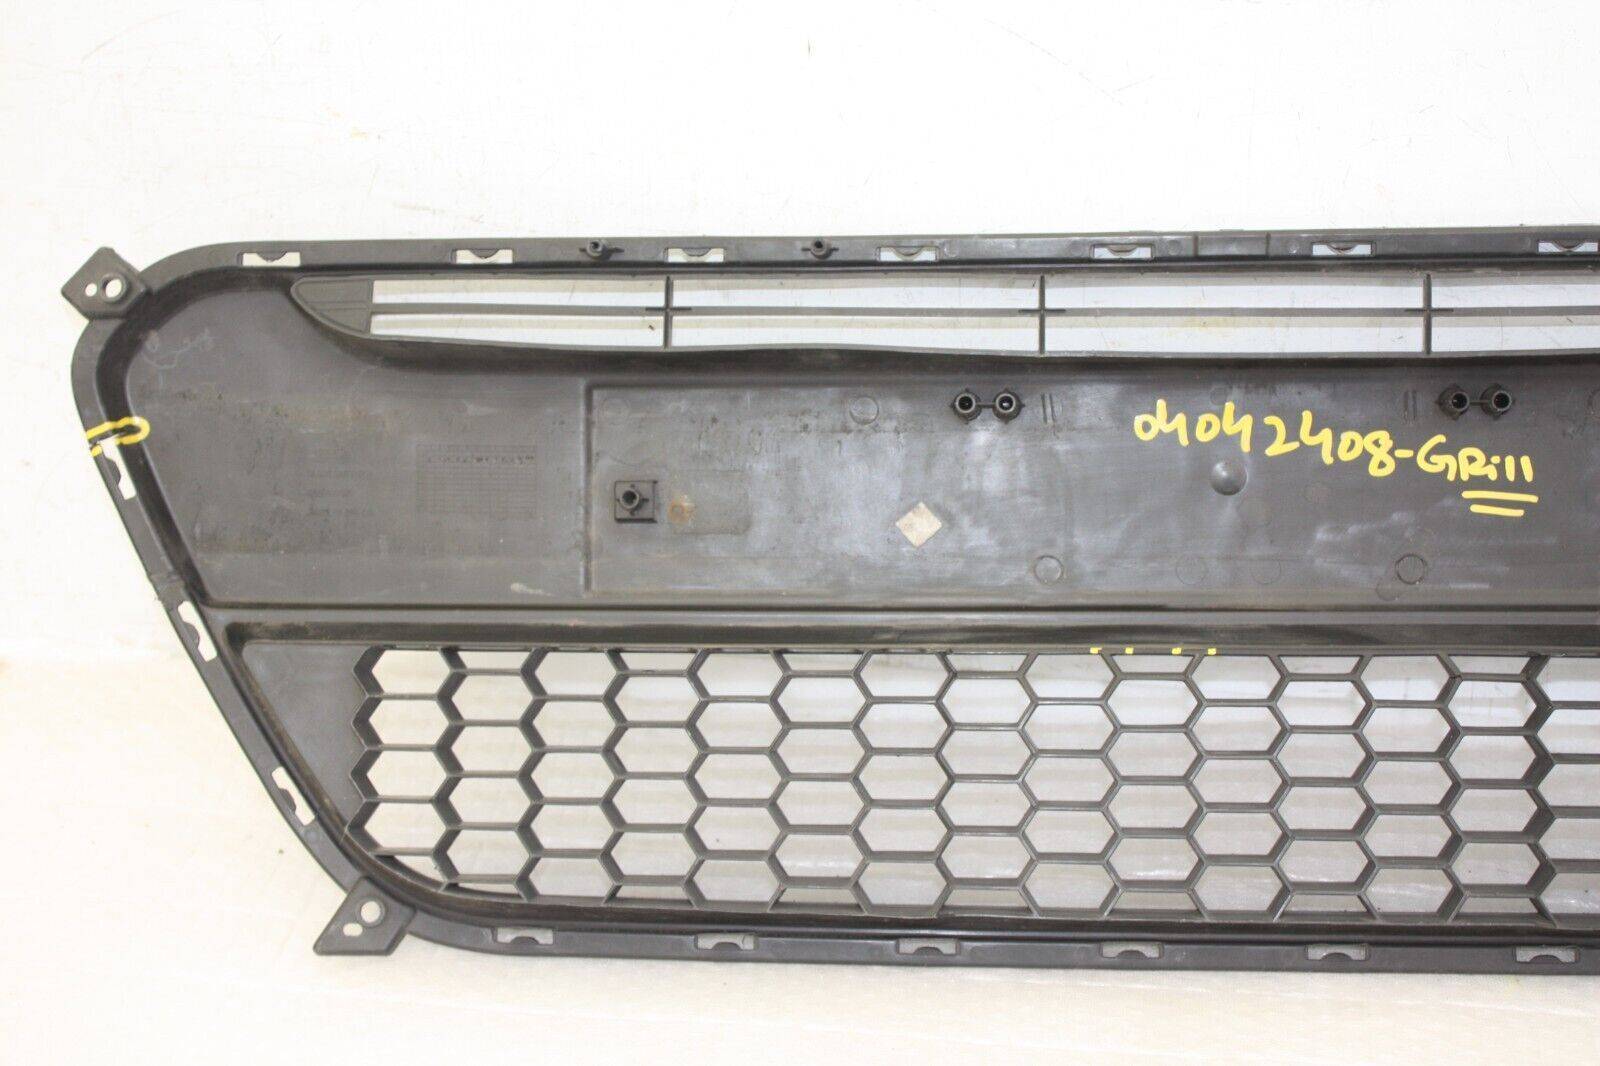 Kia-Picanto-Front-Bumper-Lower-Grill-2011-TO-2015-86569-1Y000-Genuine-DAMAGED-176319954983-13